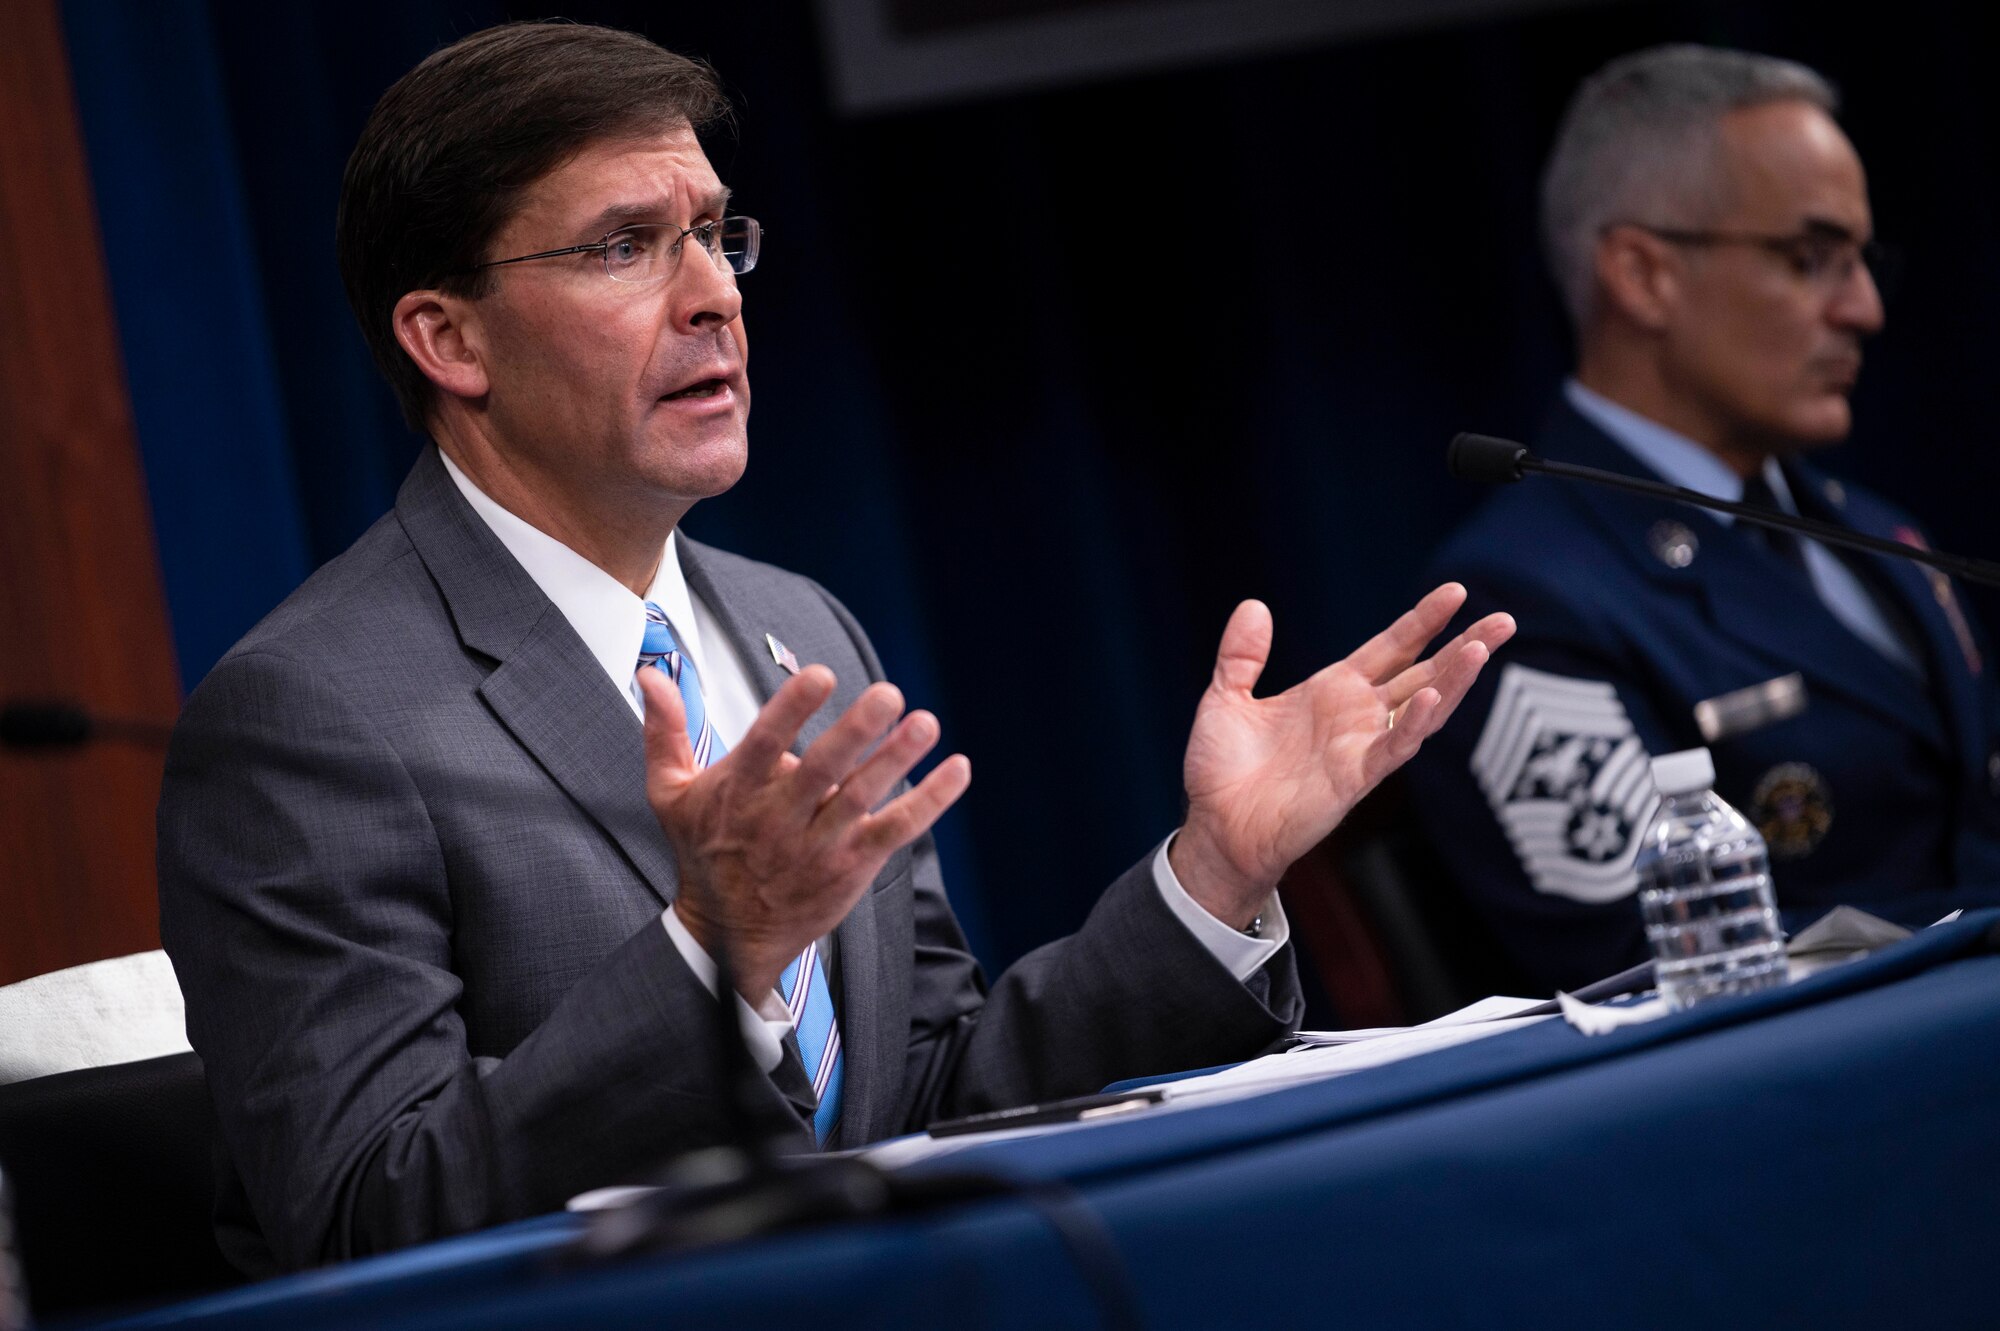 Defense Secretary Dr. Mark T. Esper gestures while sitting and speaking at the Pentagon.